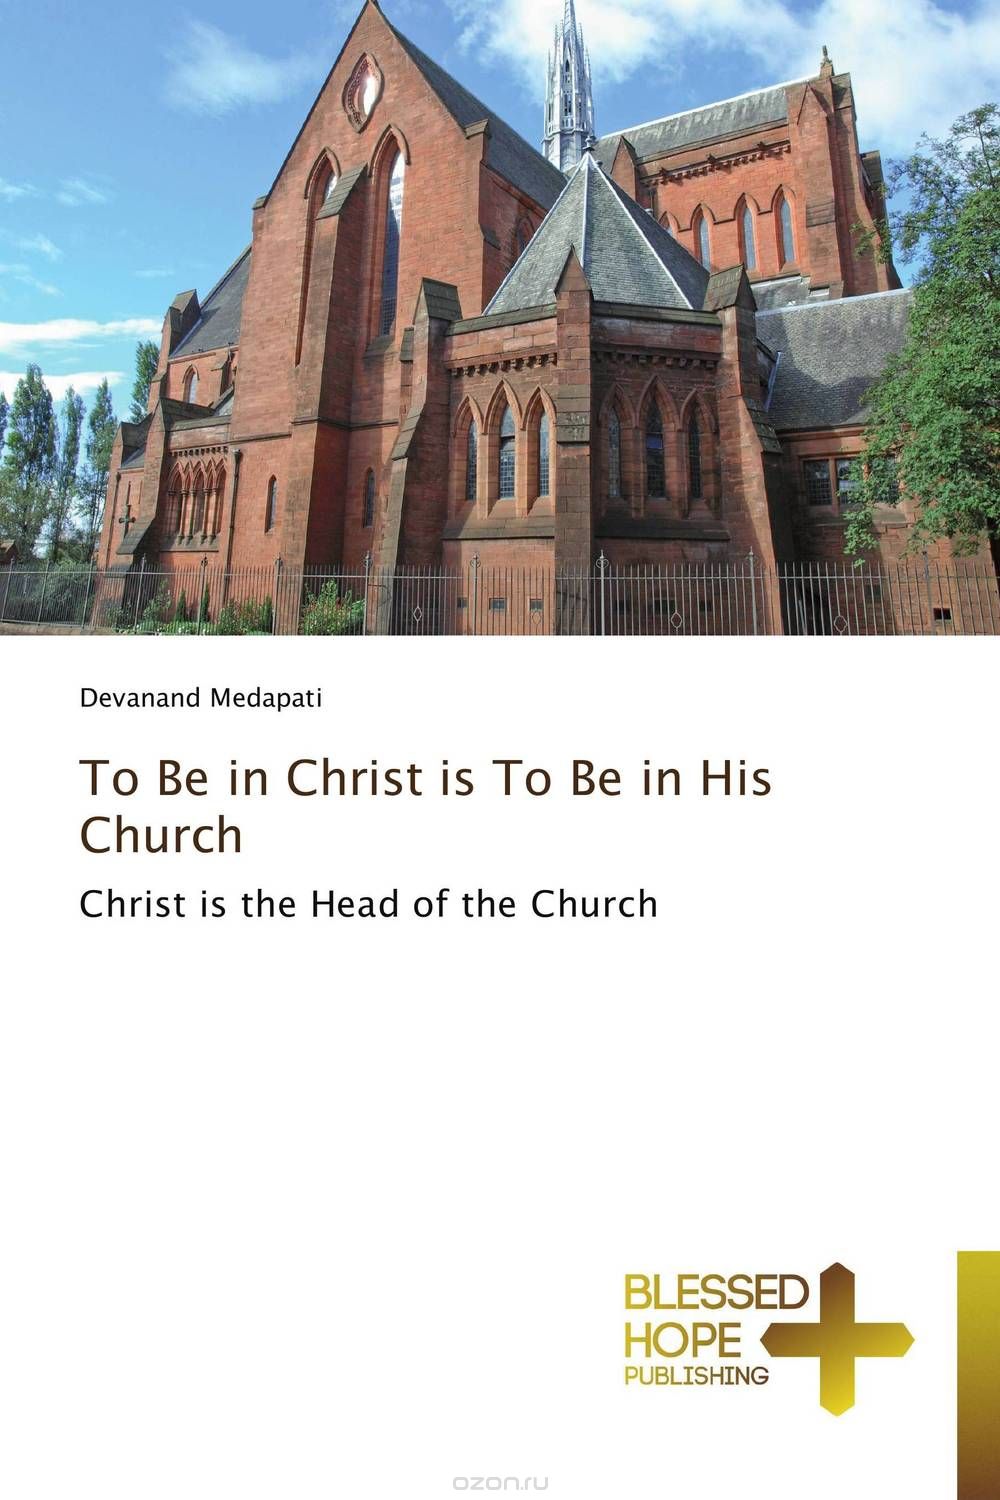 To Be in Christ is To Be in His Church